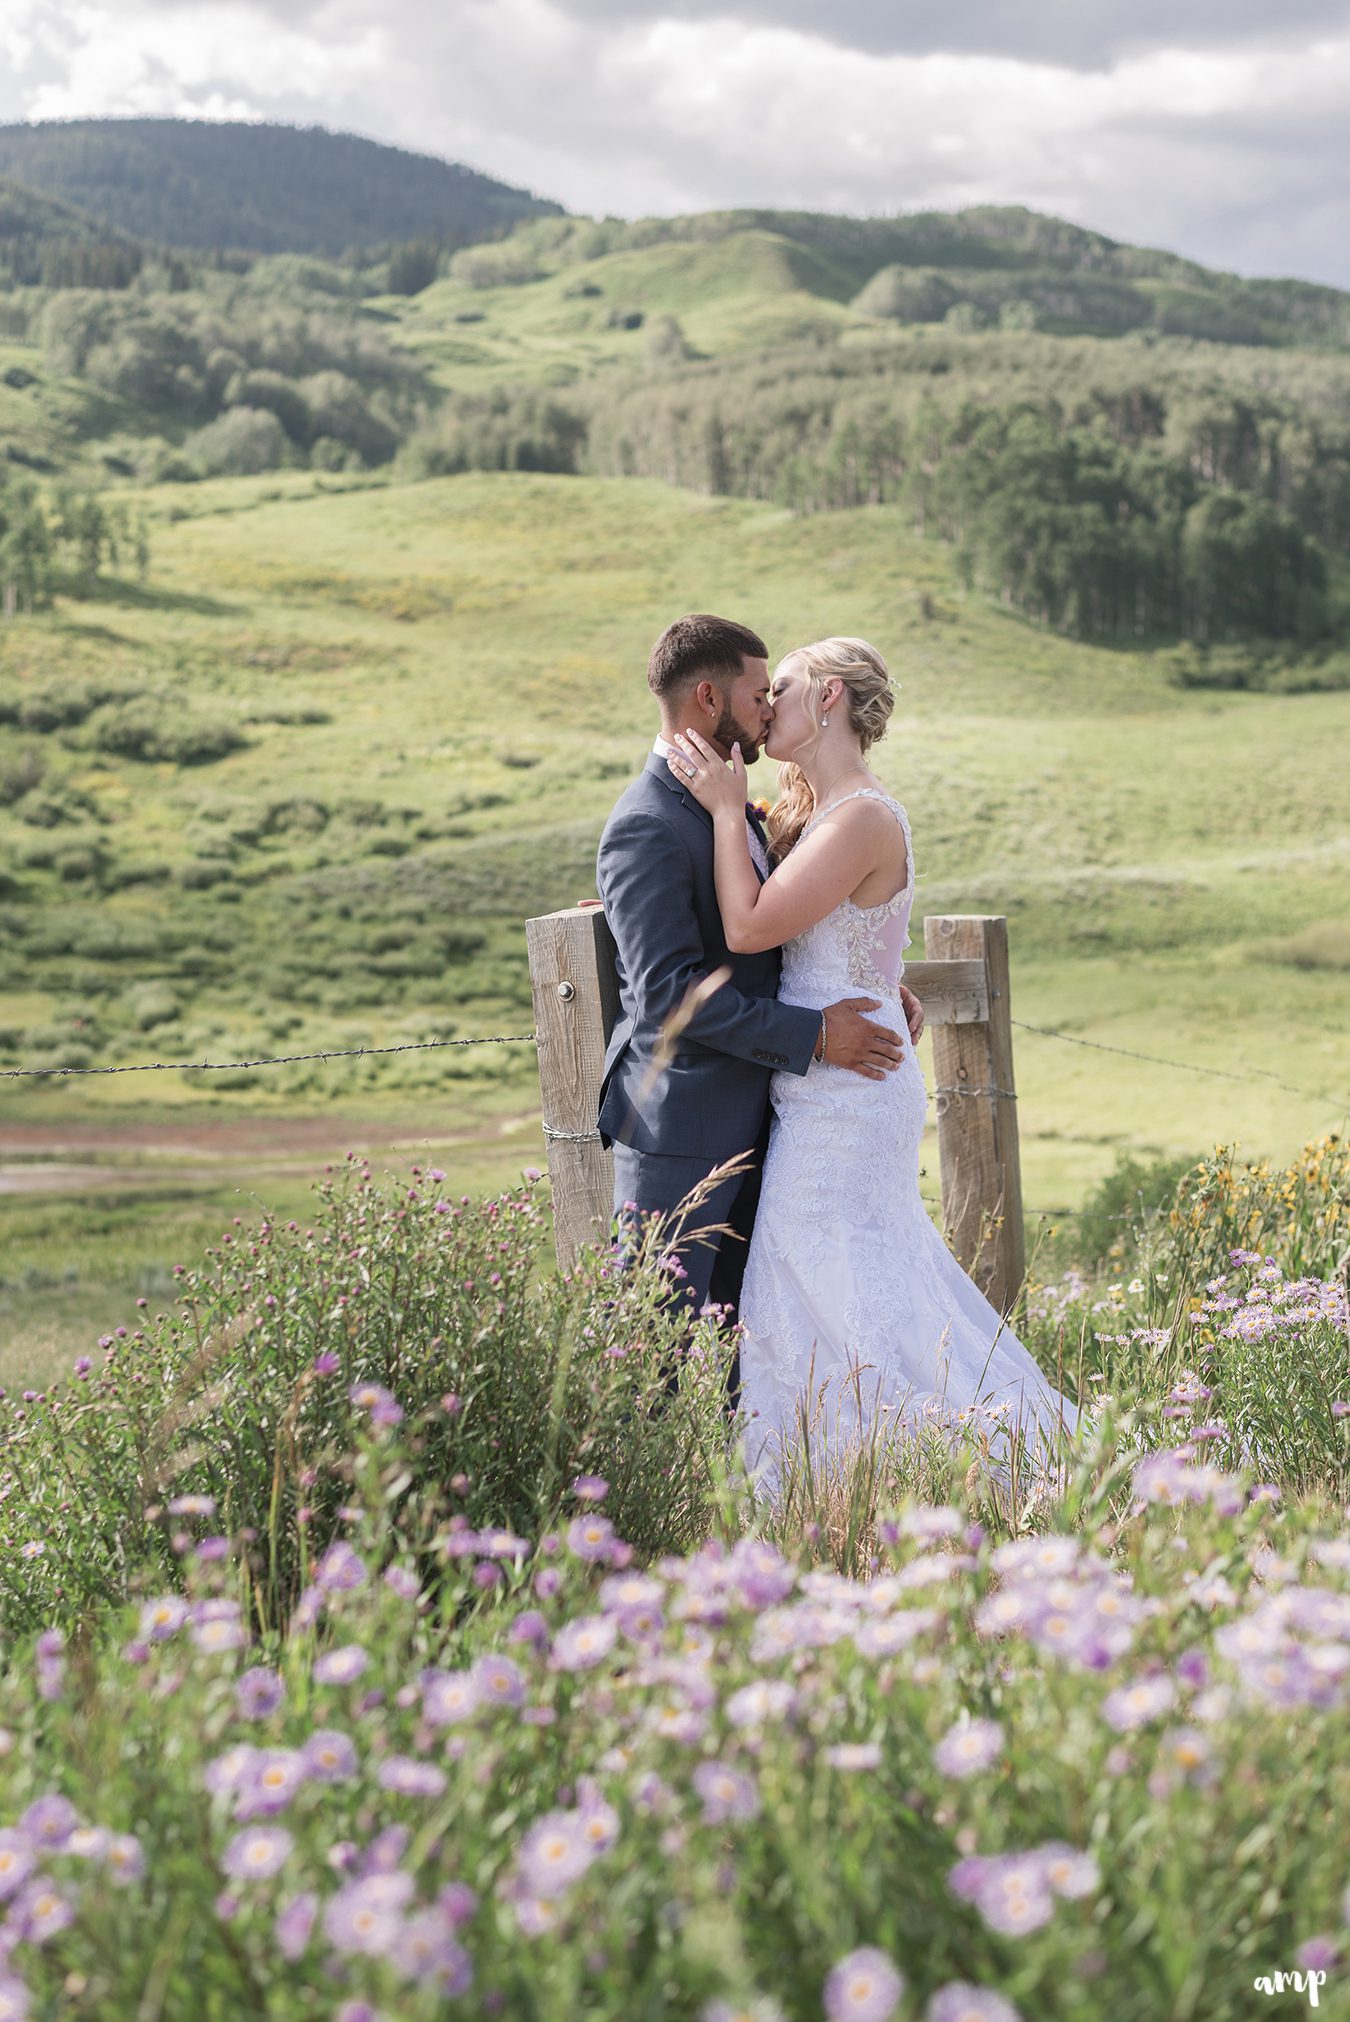 Bride and groom sharing a kiss among the wildflowers with mountains in the distance